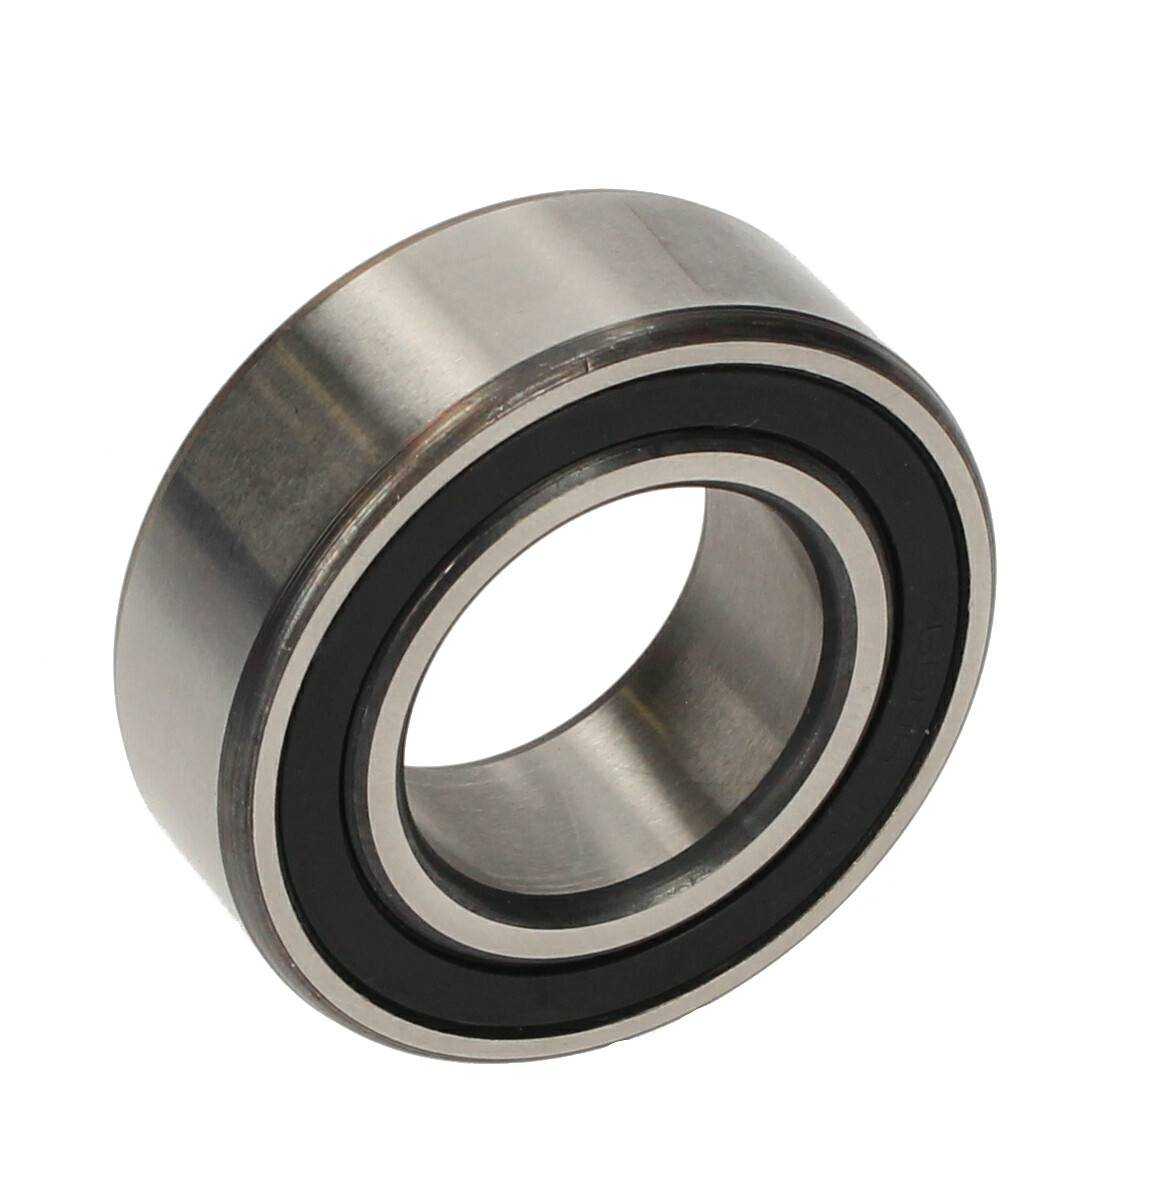 BALL BEARING 63006-RSR-FAG (WITHOUT PACKAGING) - Image 1